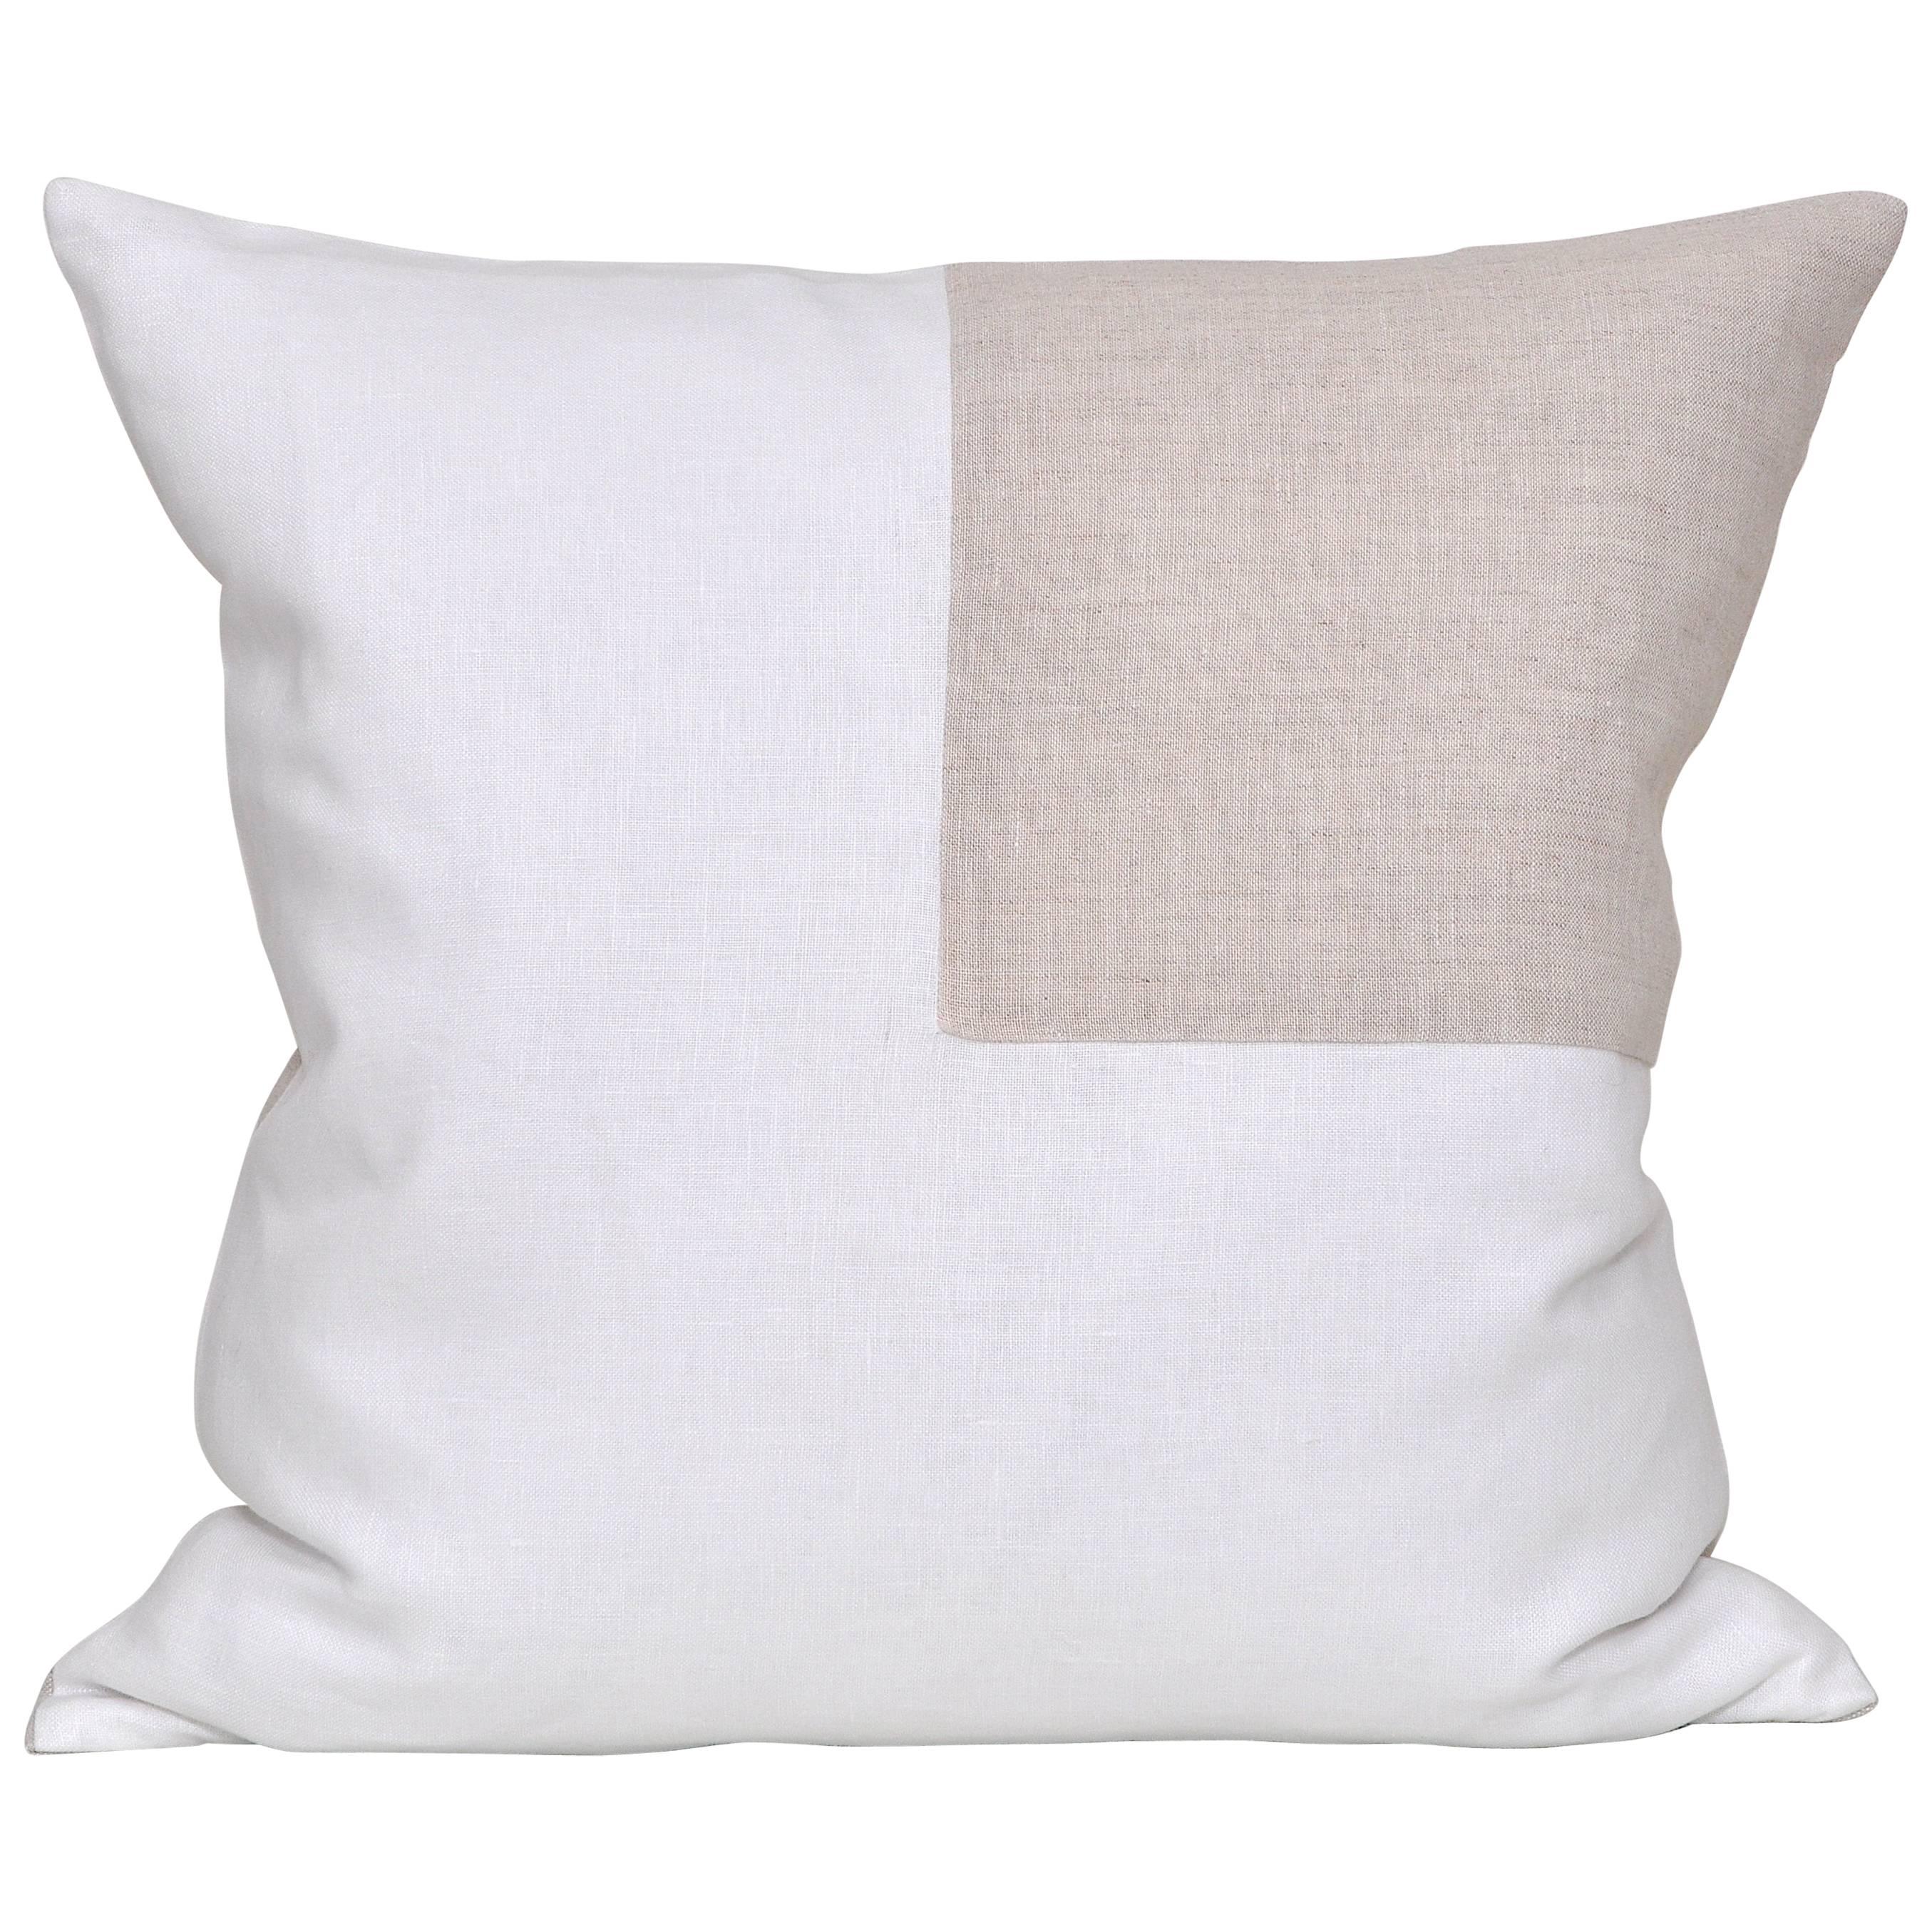 Large Contemporary White Irish Linen Pillow with Vintage Oatmeal Patch For Sale